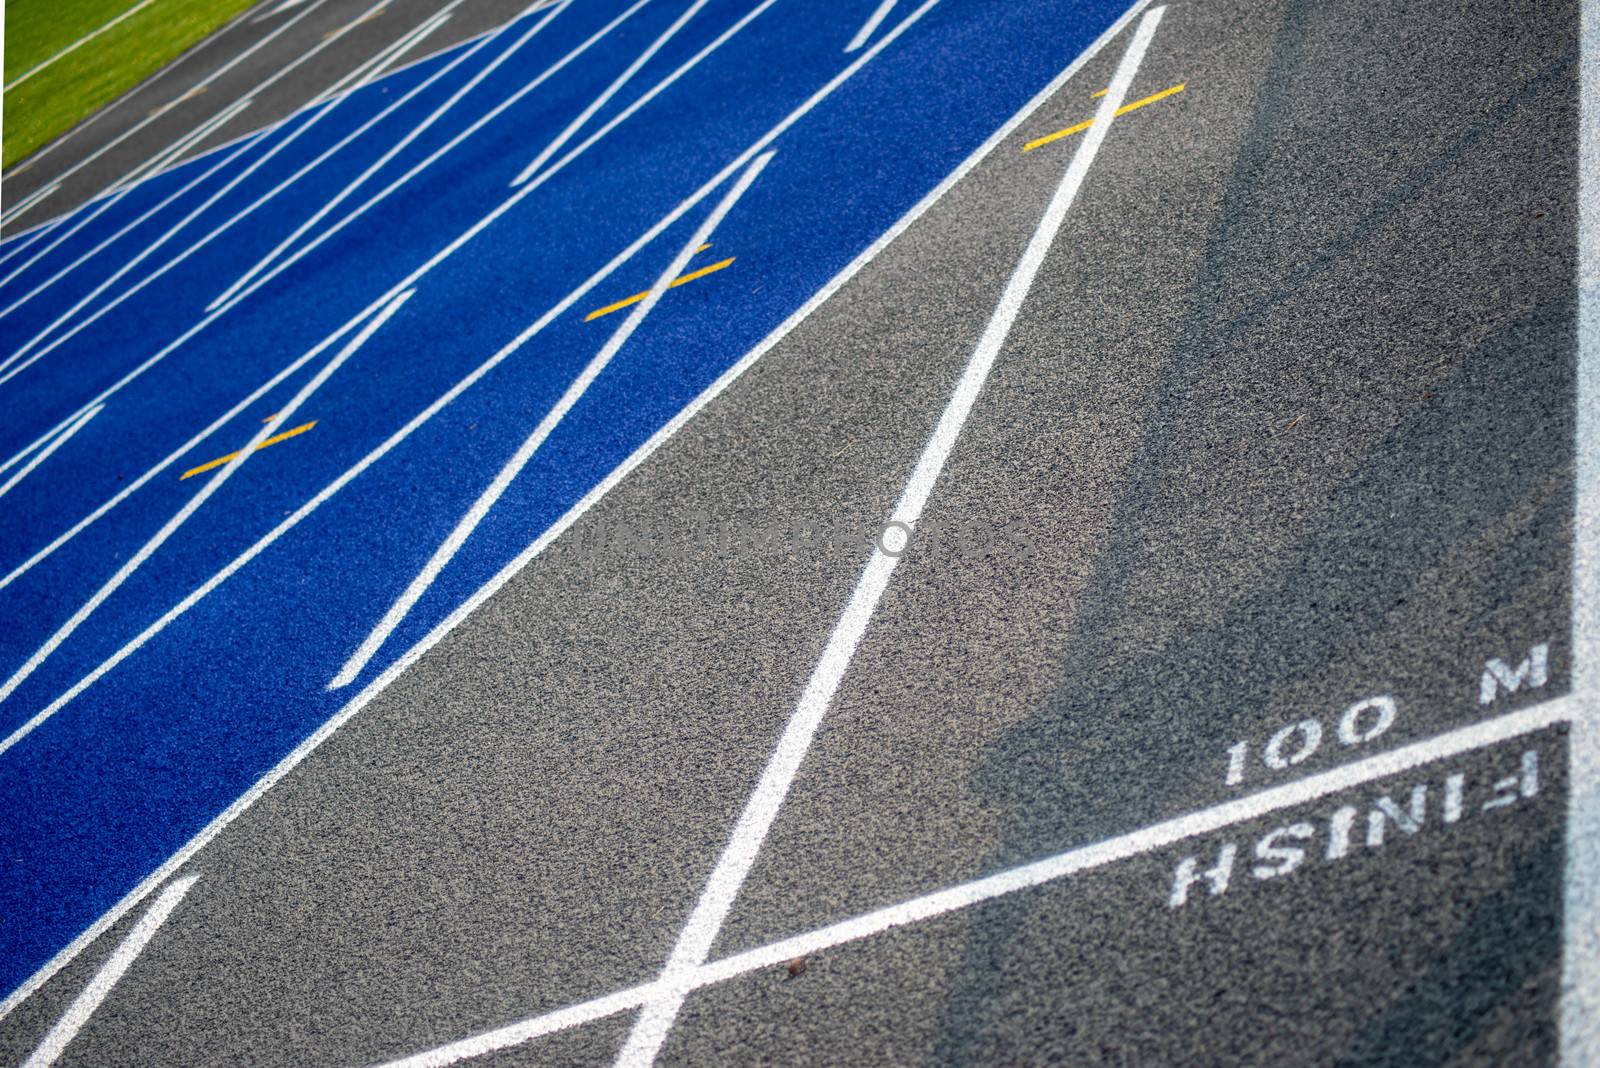 100 m finish line marker on textured blue and gray running track by marysalen